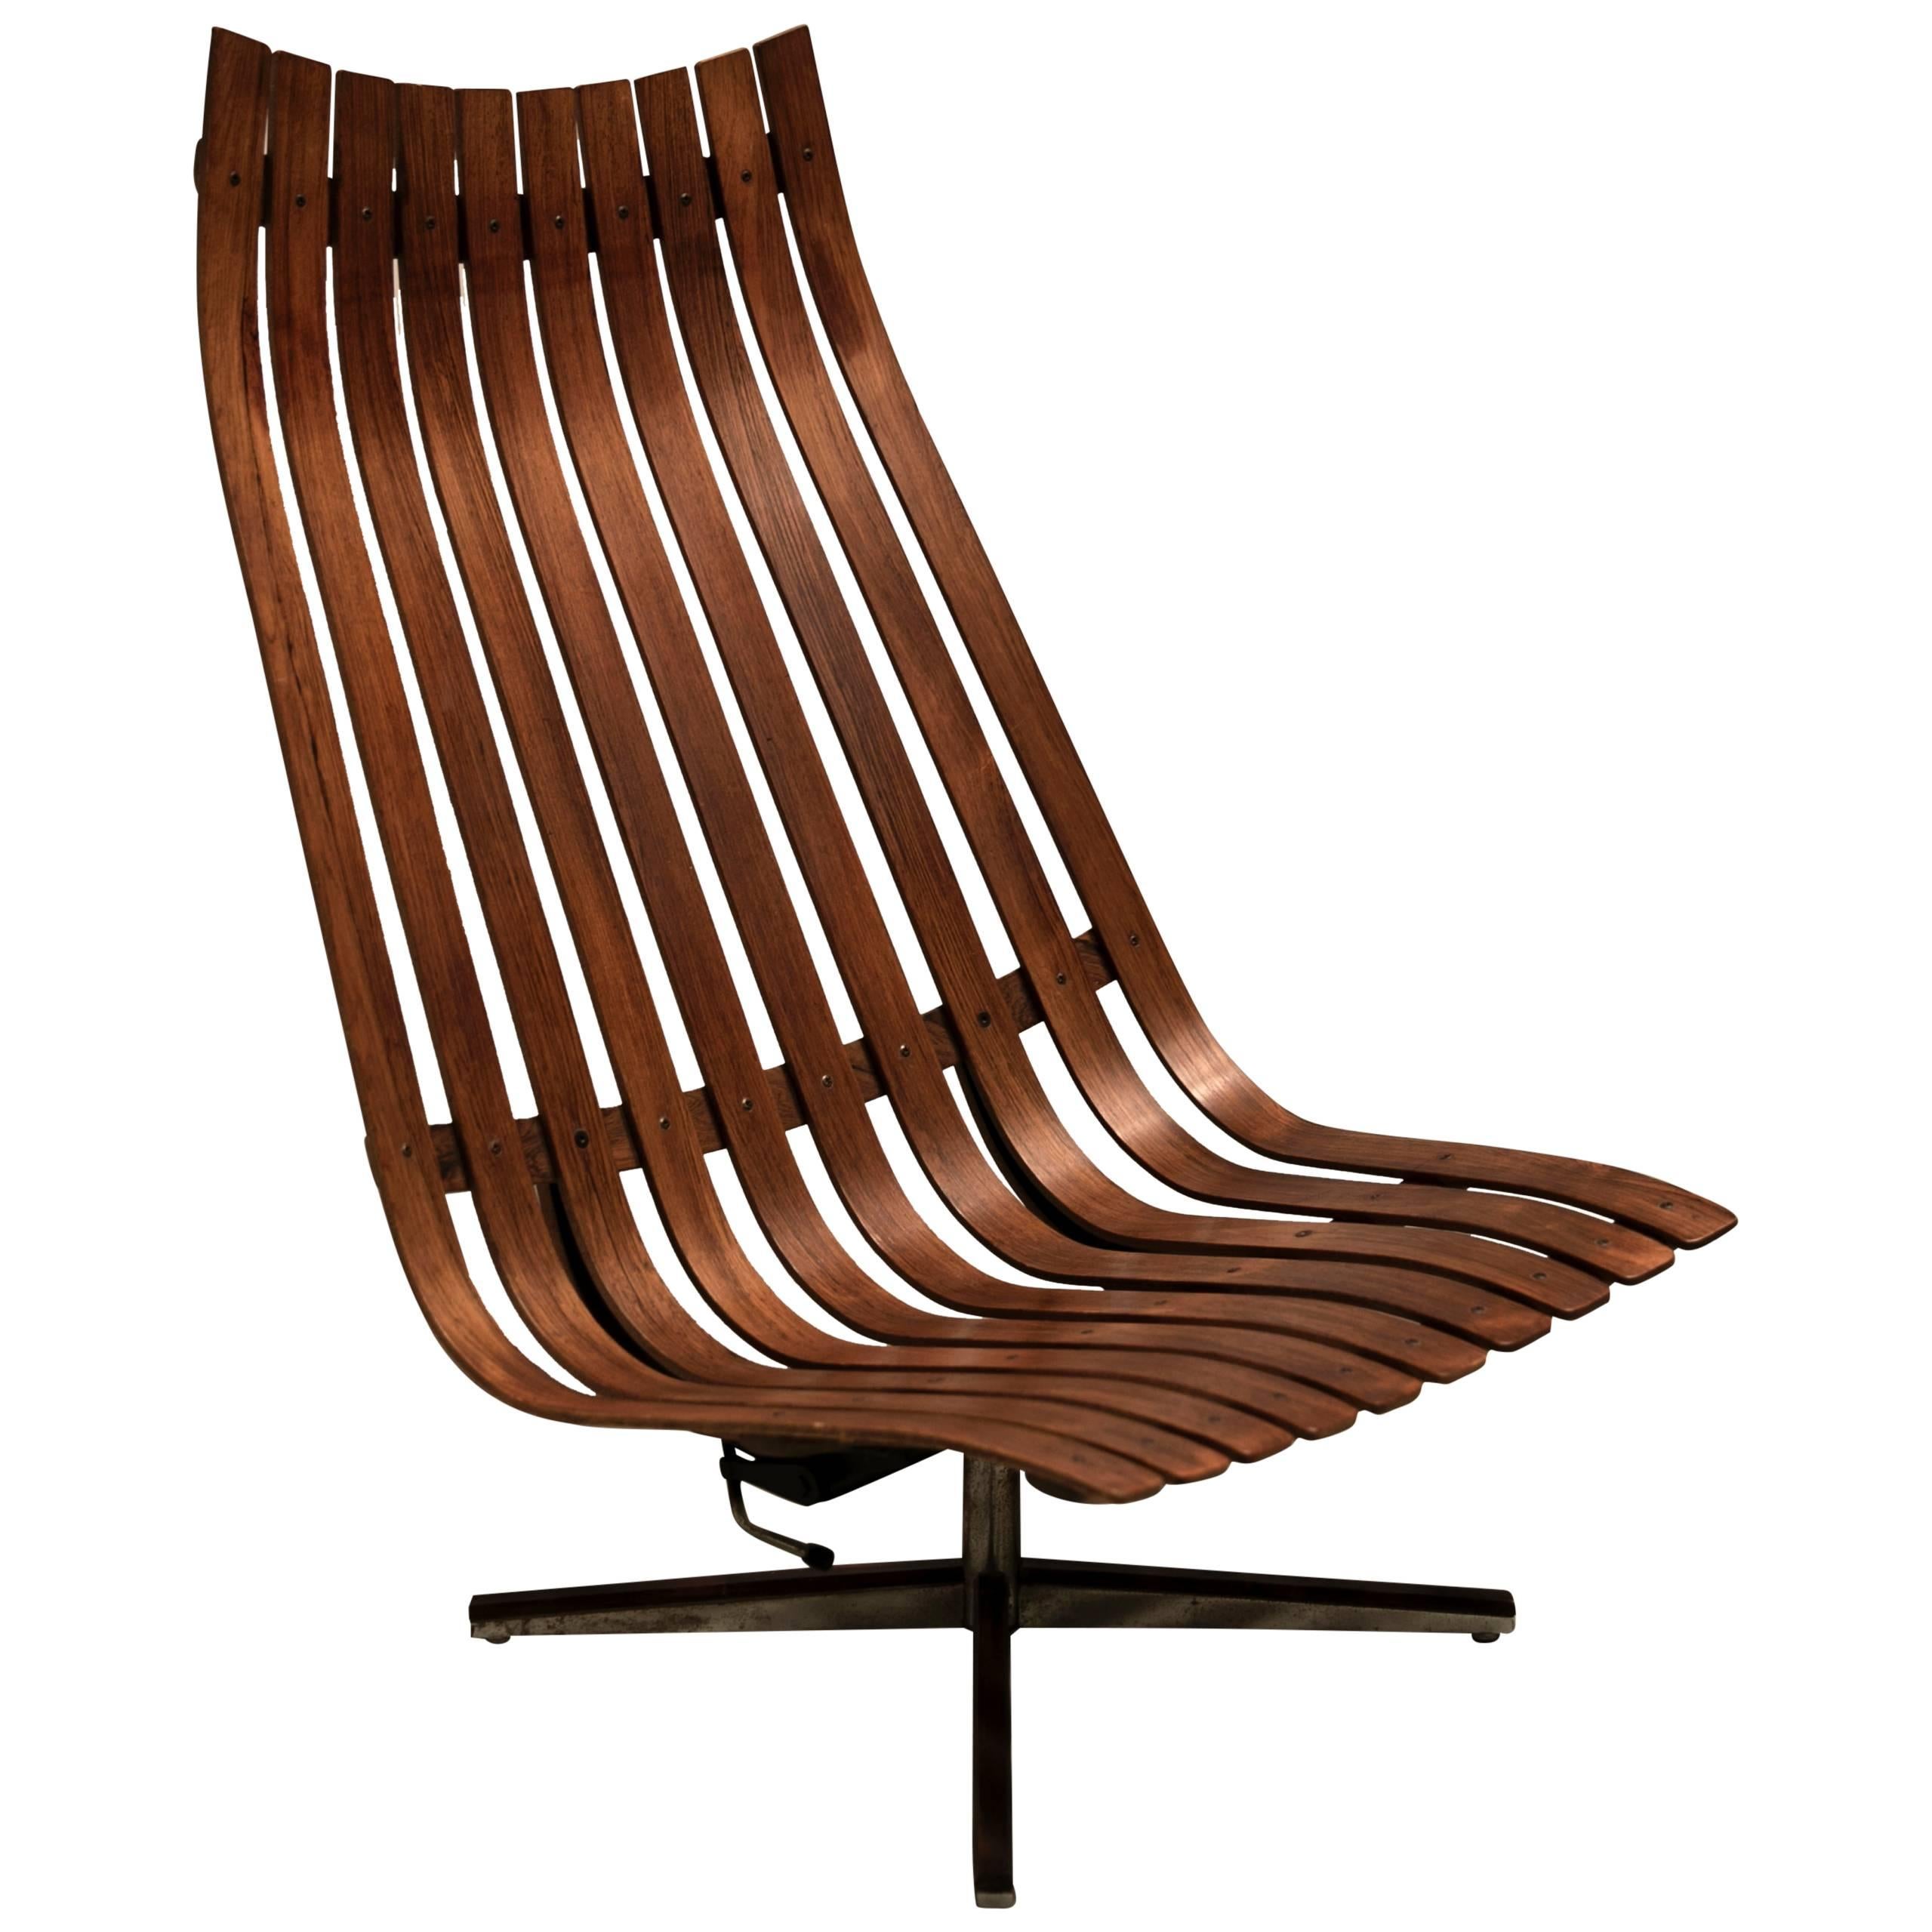 1960s “Scandia” Swivel Lounge Chair in Rosewood by Hans Brattrud for Hove Mobler For Sale